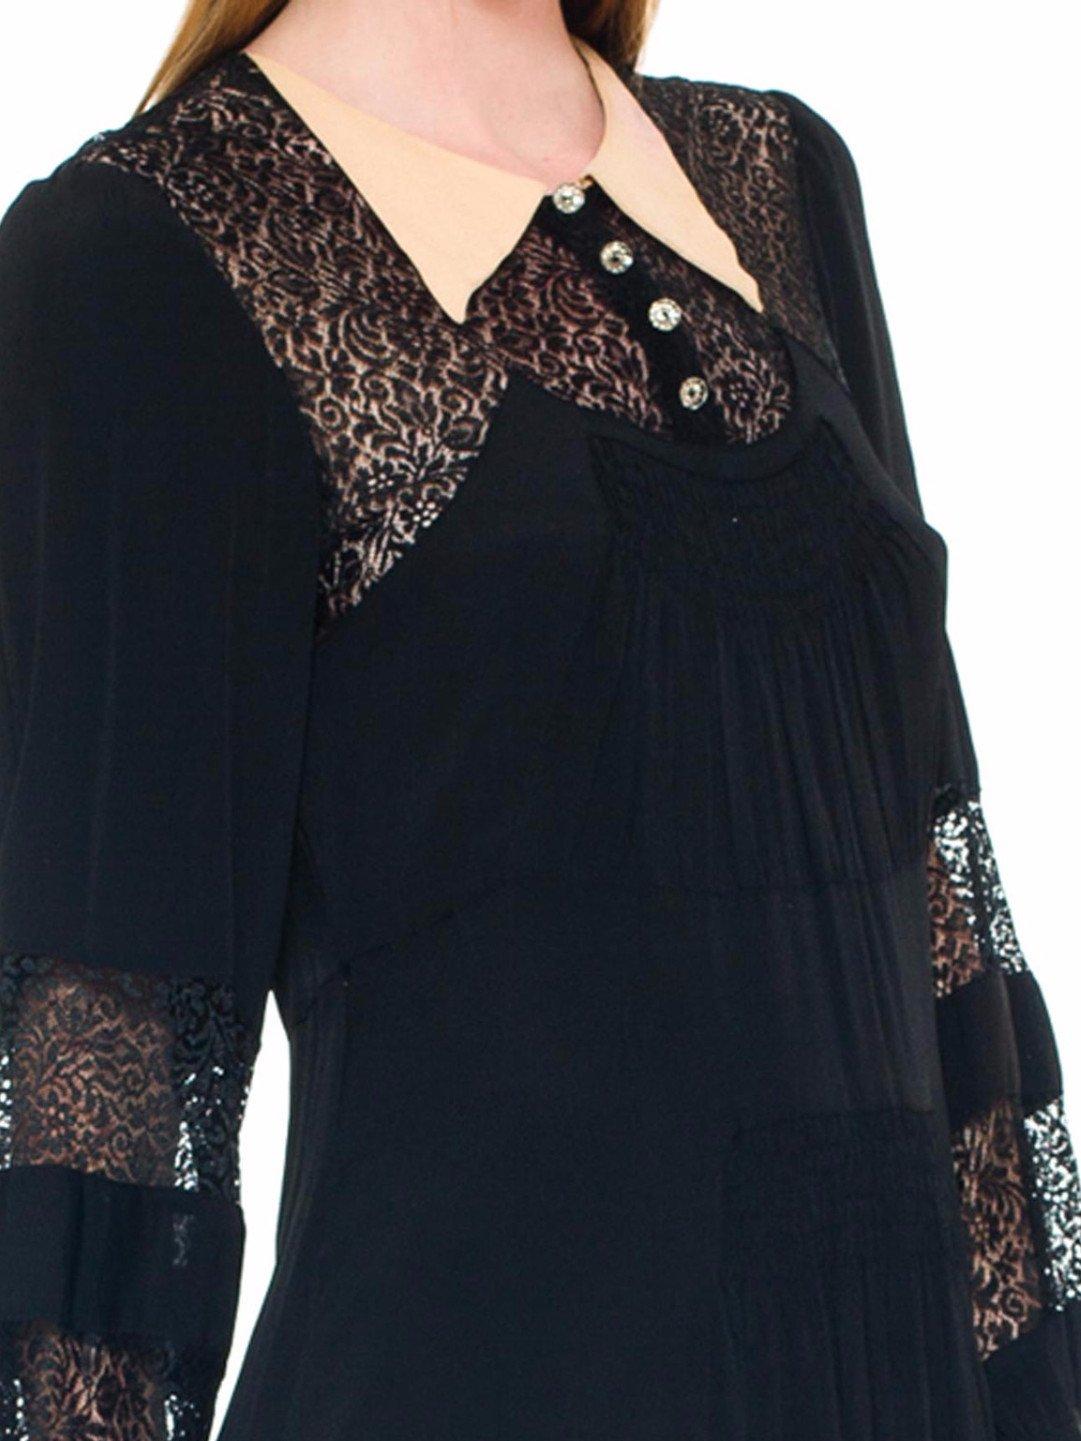 Women's 1930S Black Silk Faille & Lace Collared Dress With Sleeves Deco Glass Buttons For Sale